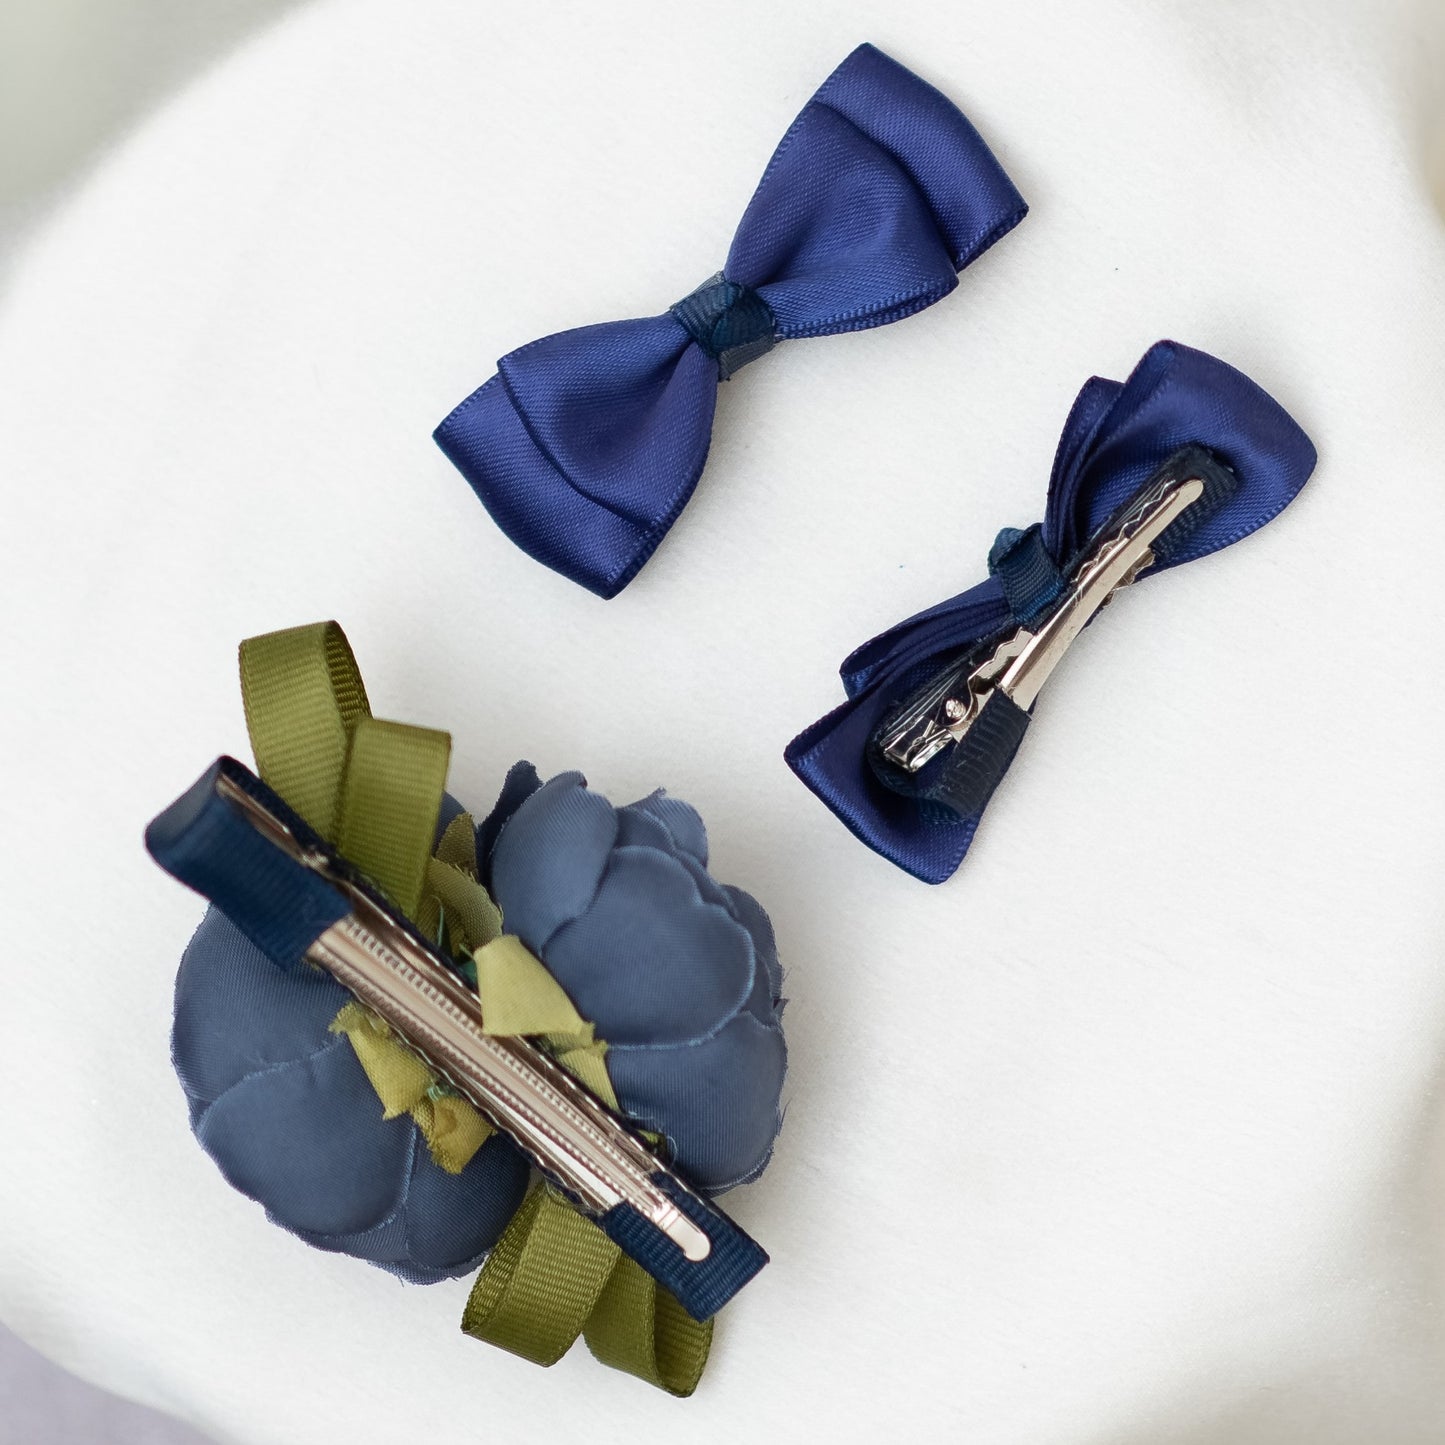 Decorative flower ornamented on alligator clip along with shiny satin double bow alligator clips -Blue  (Set of 1 pair and 1 single clip - 3 quantity)